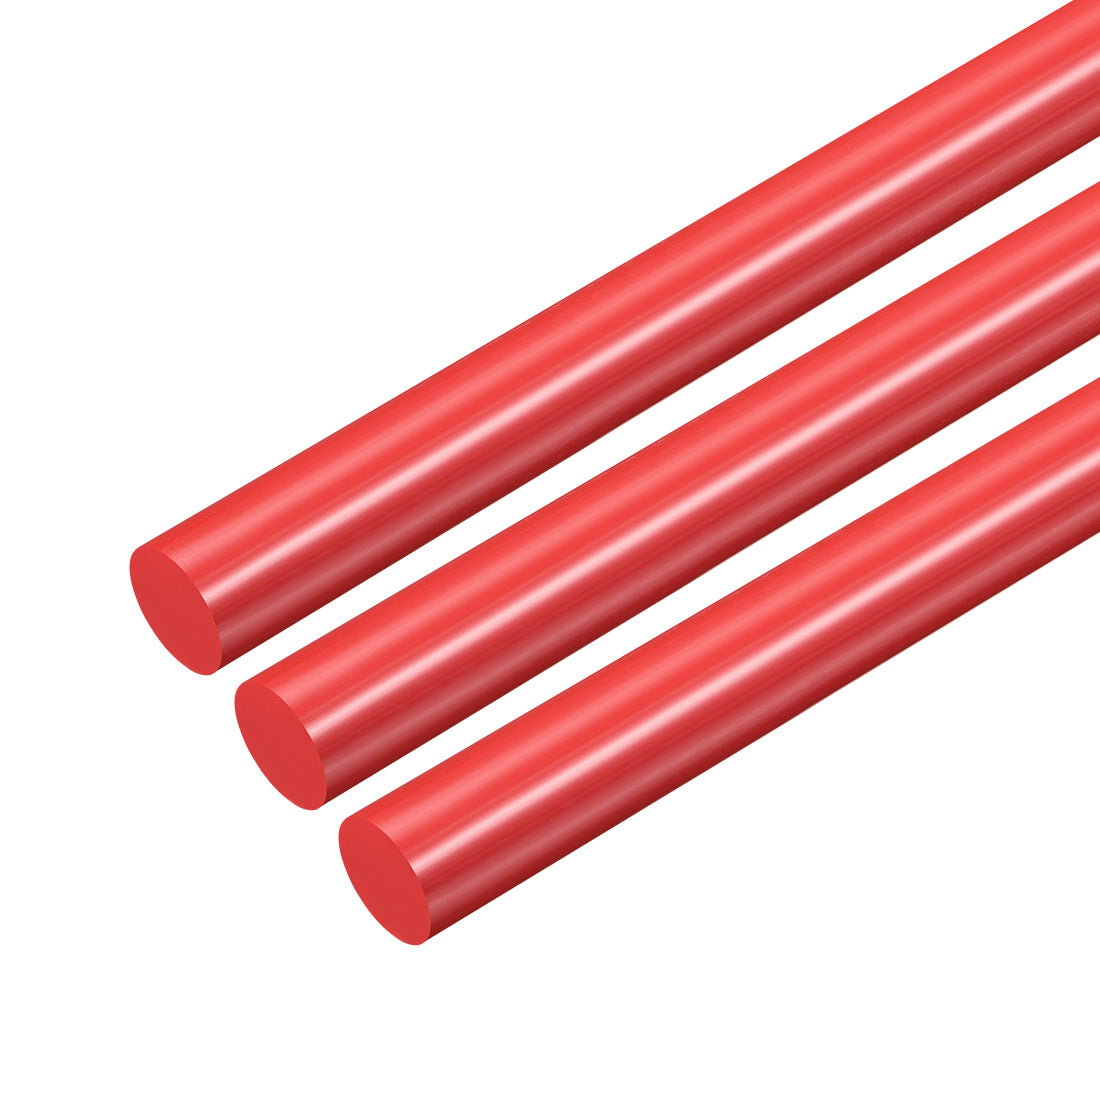 uxcell Uxcell Plastic Round Rod,10mm Dia 50cm Red Engineering Plastic Round Bar 3pcs